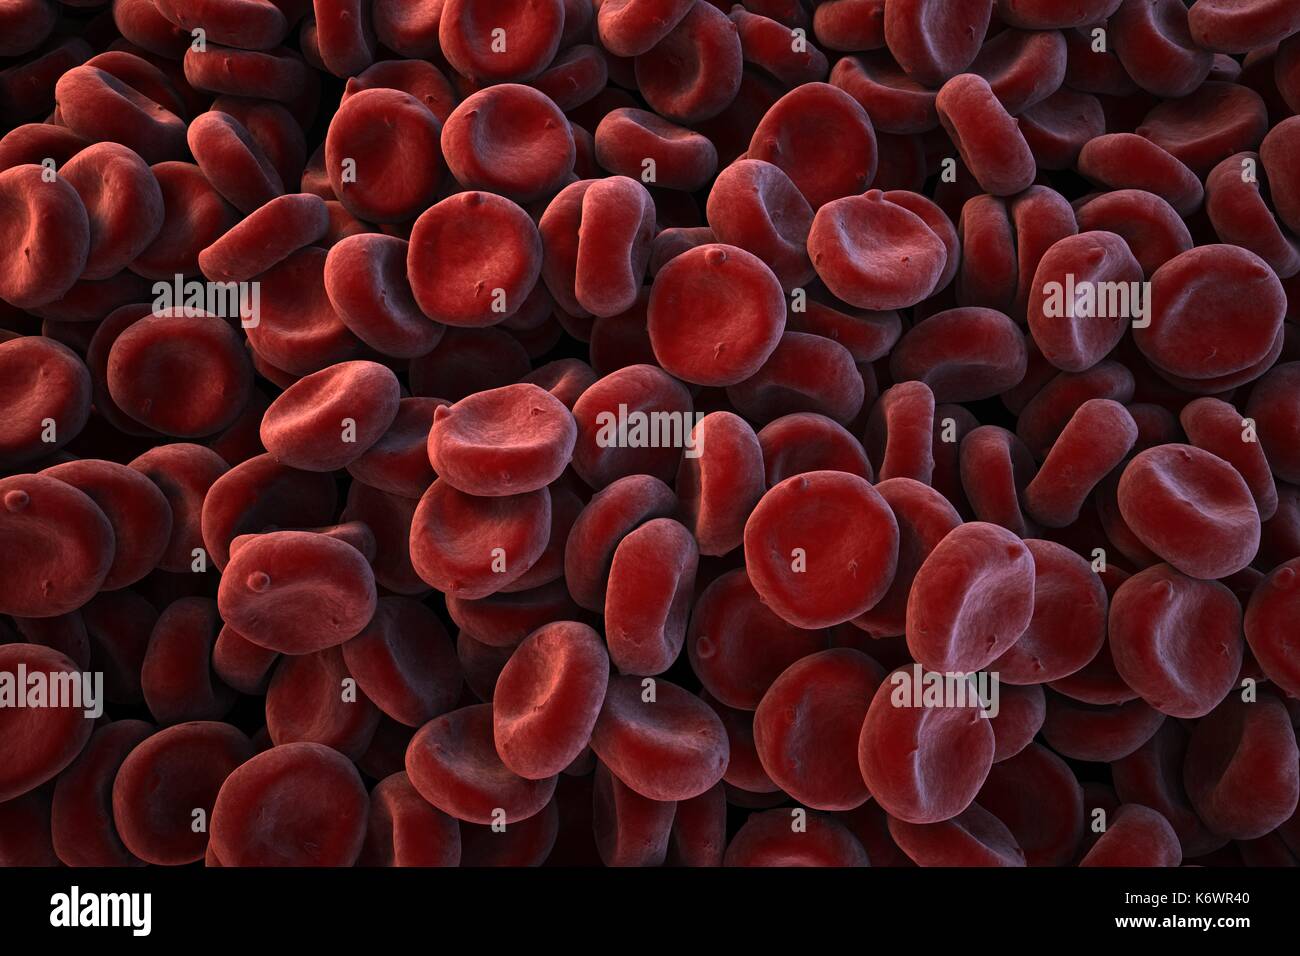 Landscape close-up of image of oxygenated Red Blood Cells (Erythrocytes) piled up, full frame, alternate false rich red colored stylized depiction. Stock Photo